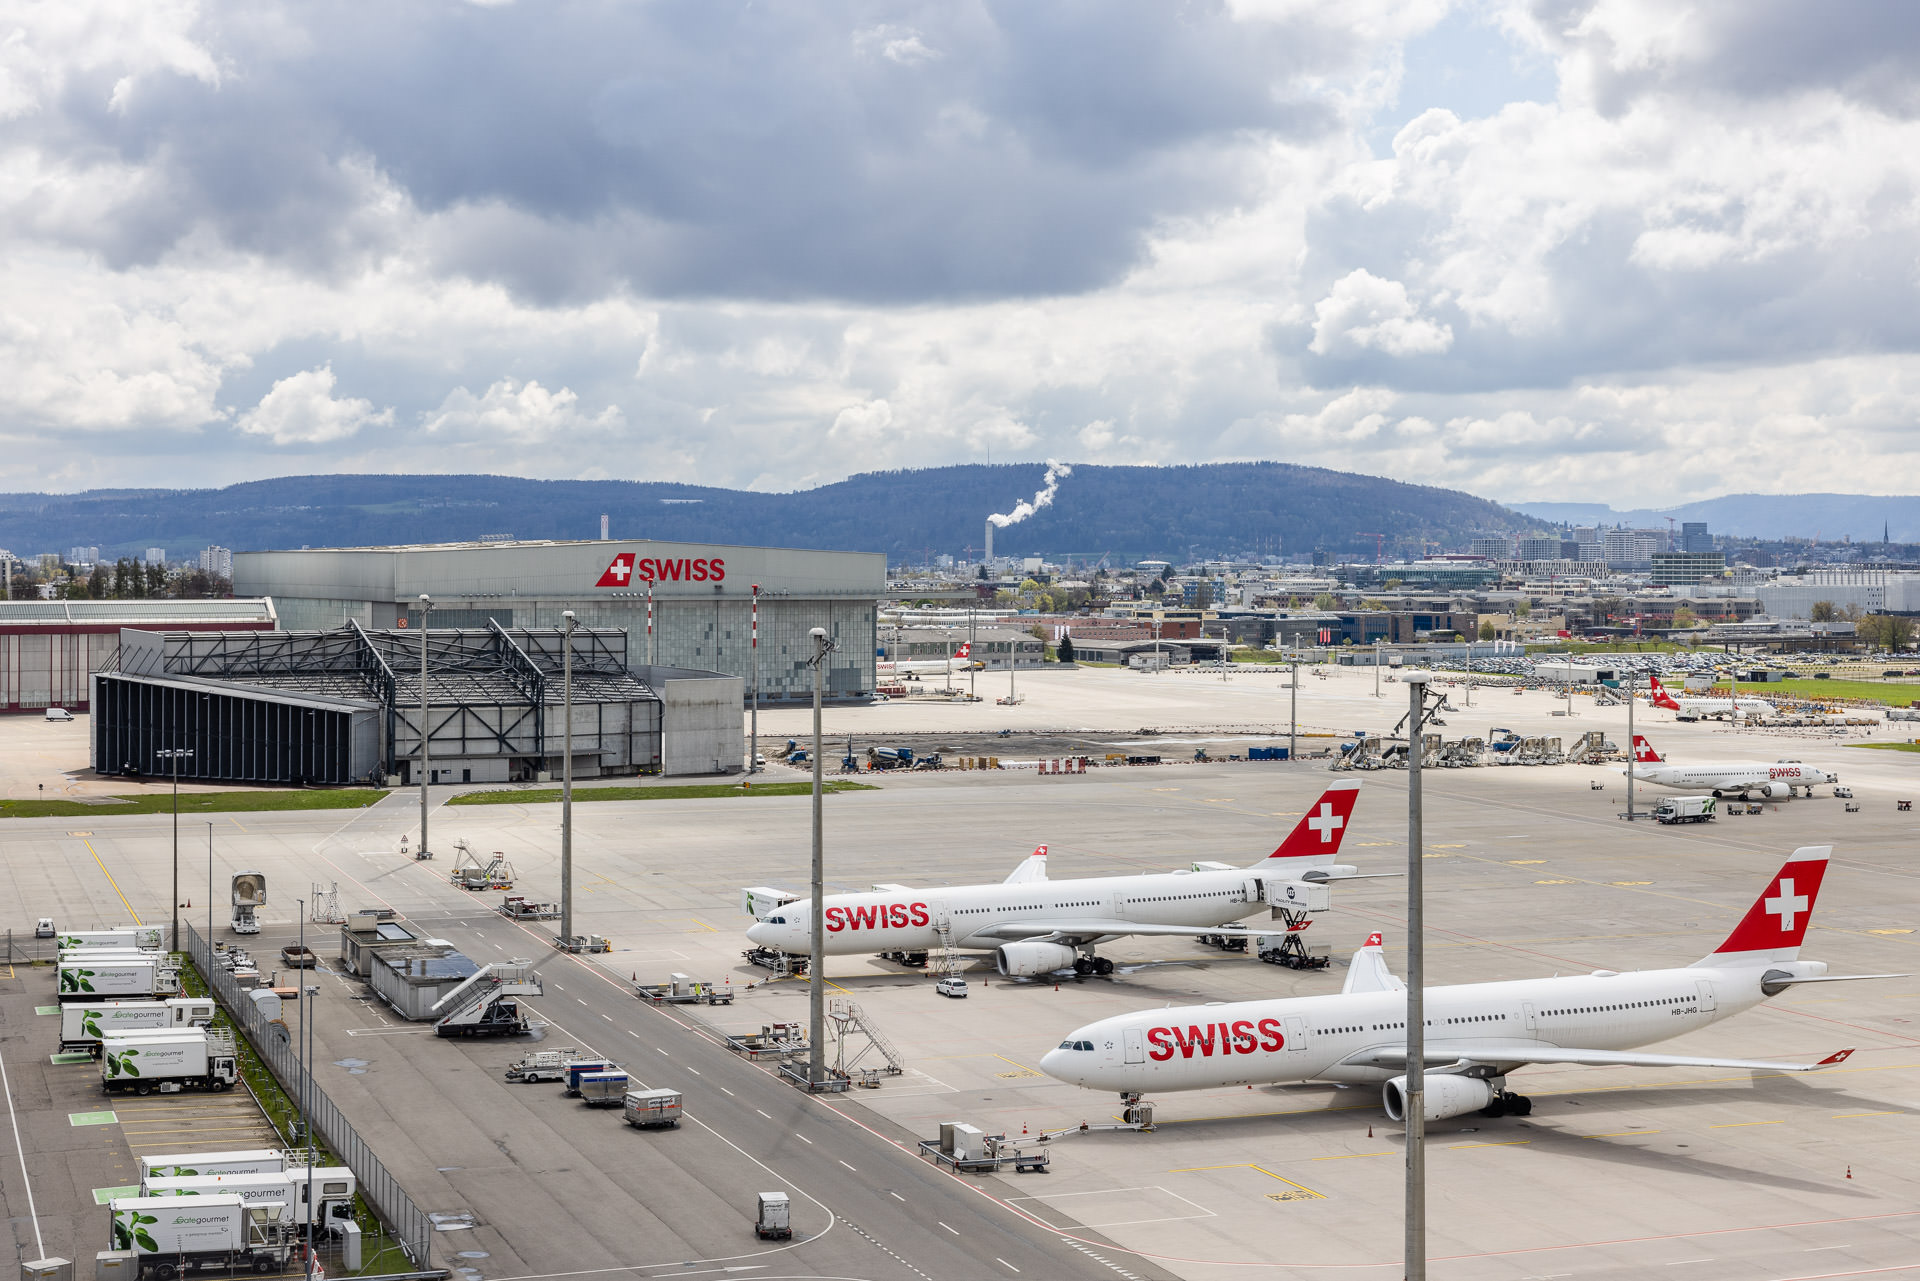 Communications key visuals for Canton of Zurich - Zurich Airport, Swiss Airlines Airplanes and maintenance area